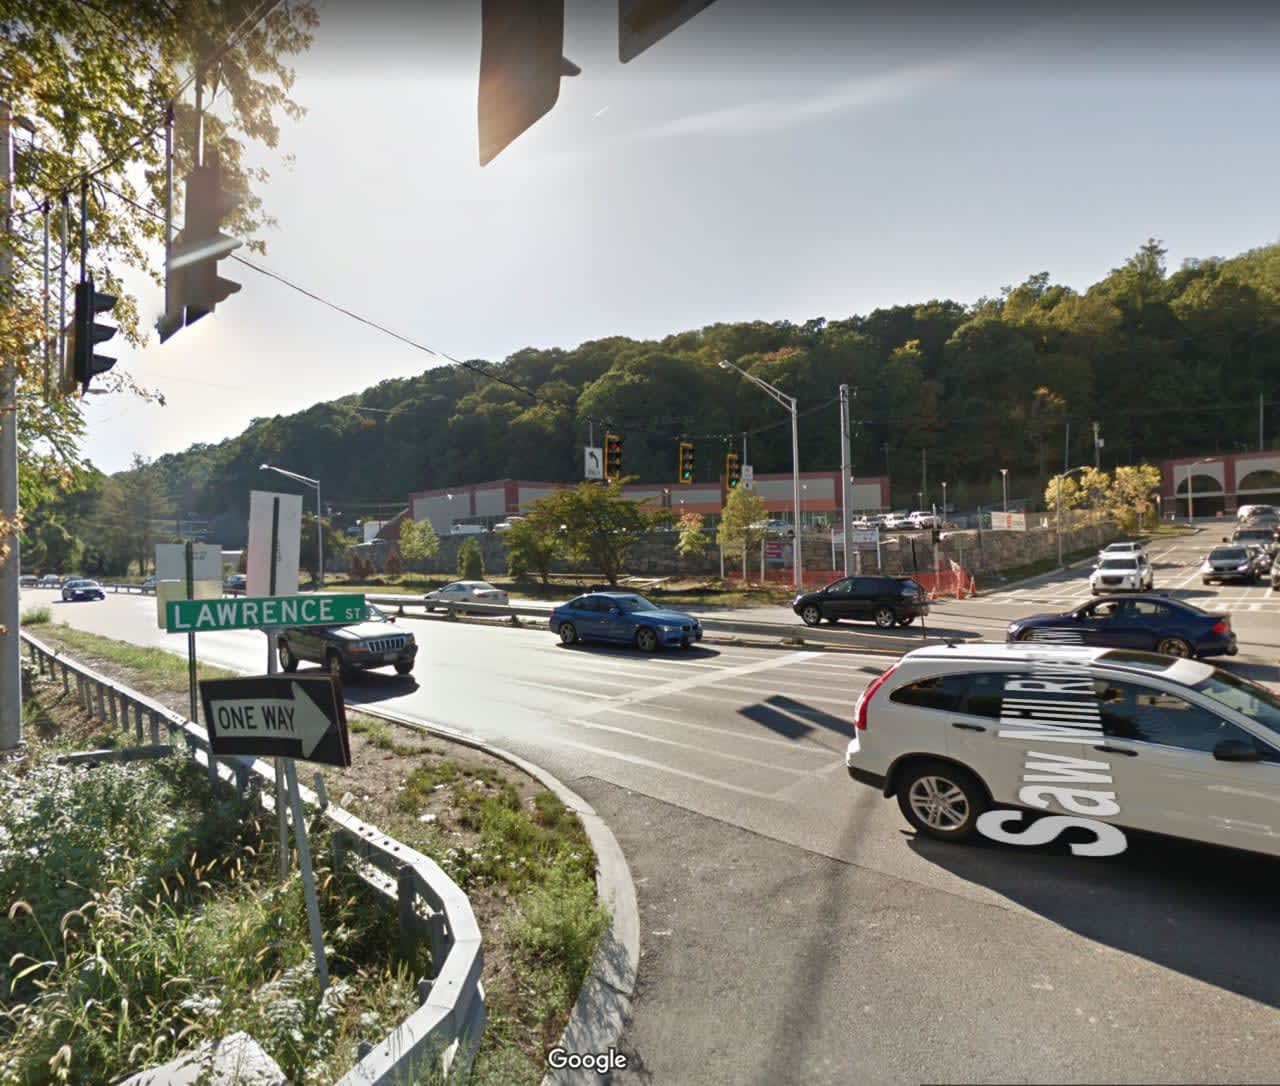 Saw Mill River Road at the intersection of Lawrence Street in Greenburgh.